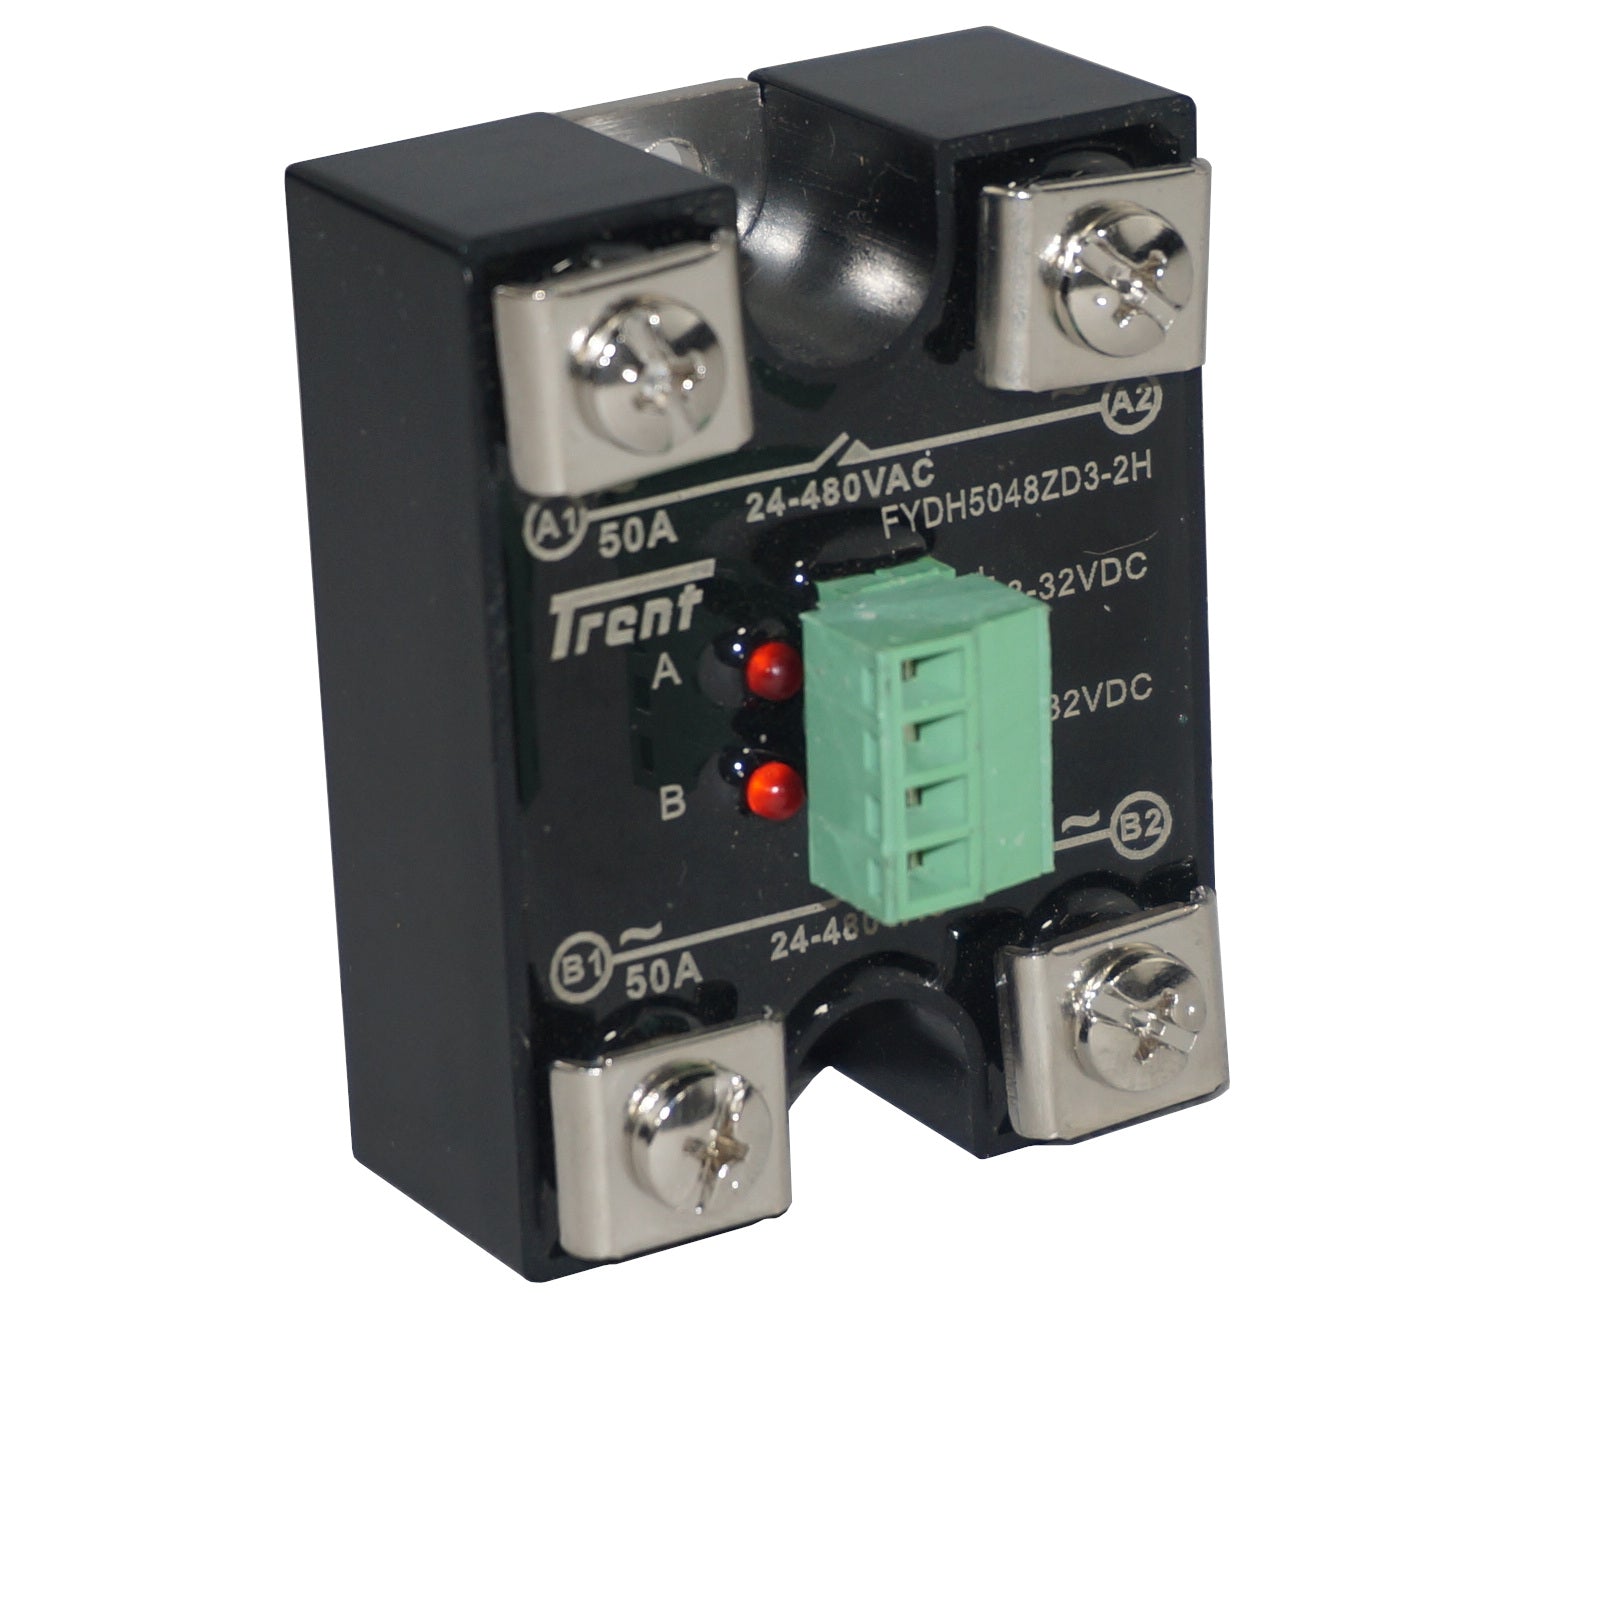 FYDH-5048ZD3-2H, Dual Solid State Relay, Two Pole 3-32VDC Control, 2 x 50A, 24-480VAC Load